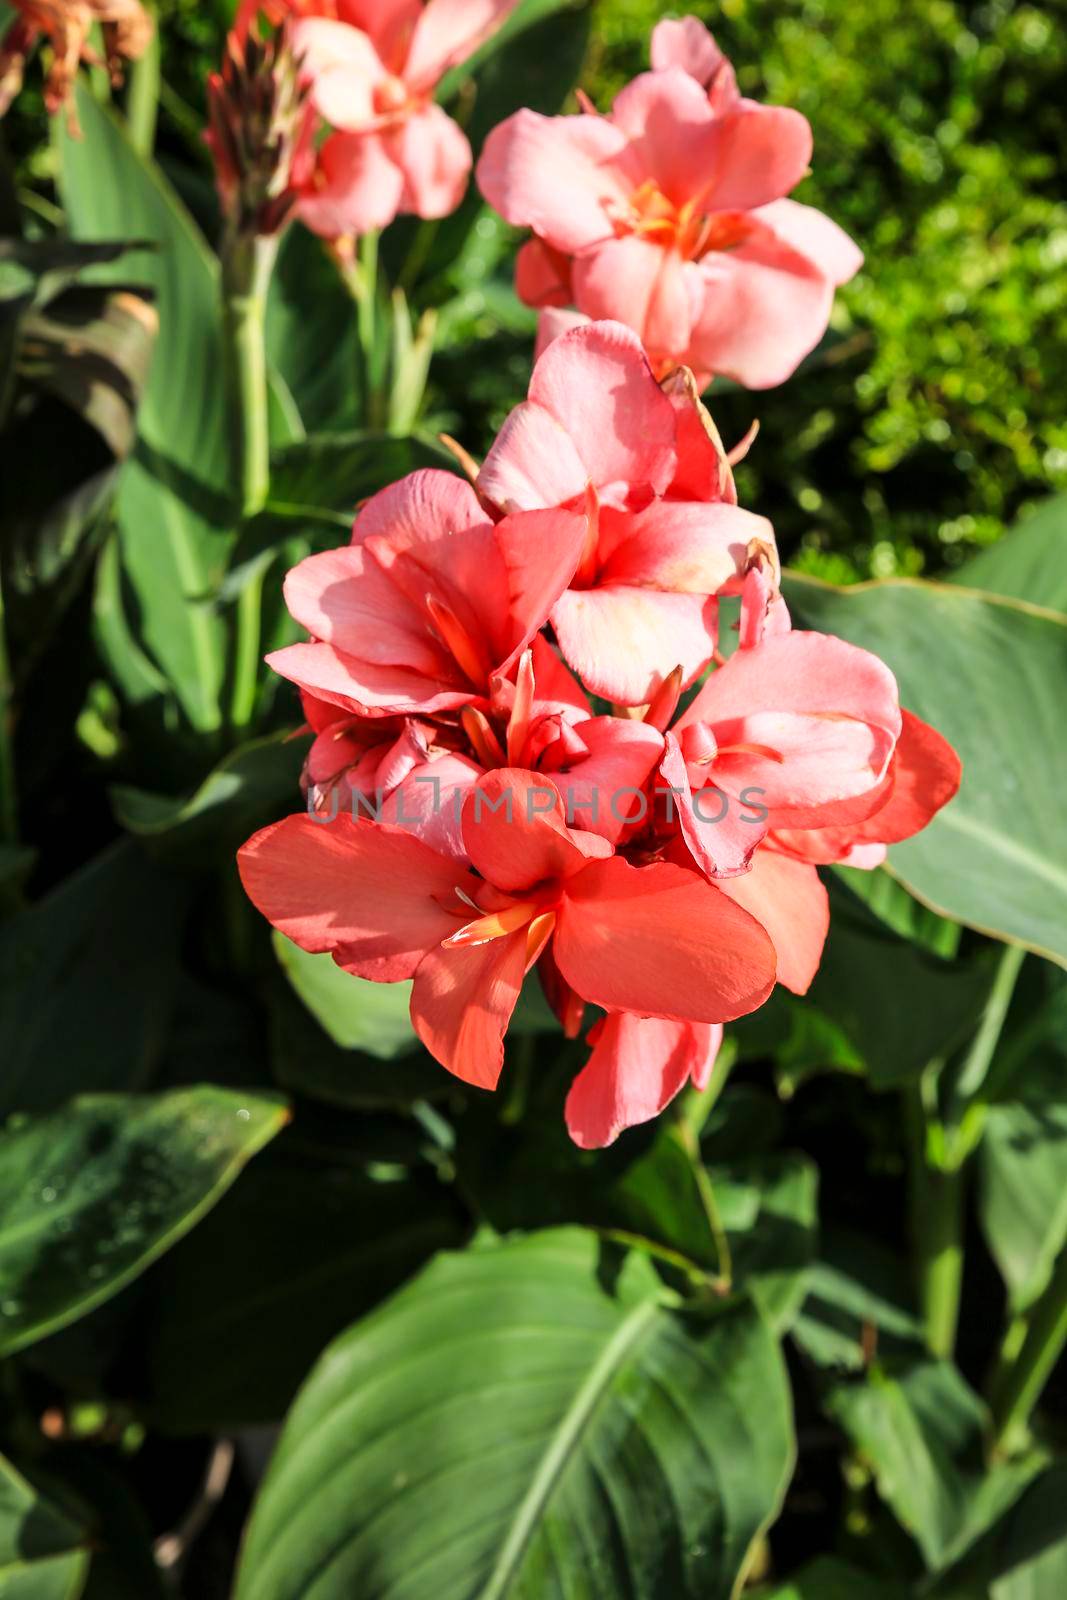 Beautiful Canna Indica plants in the garden by soniabonet